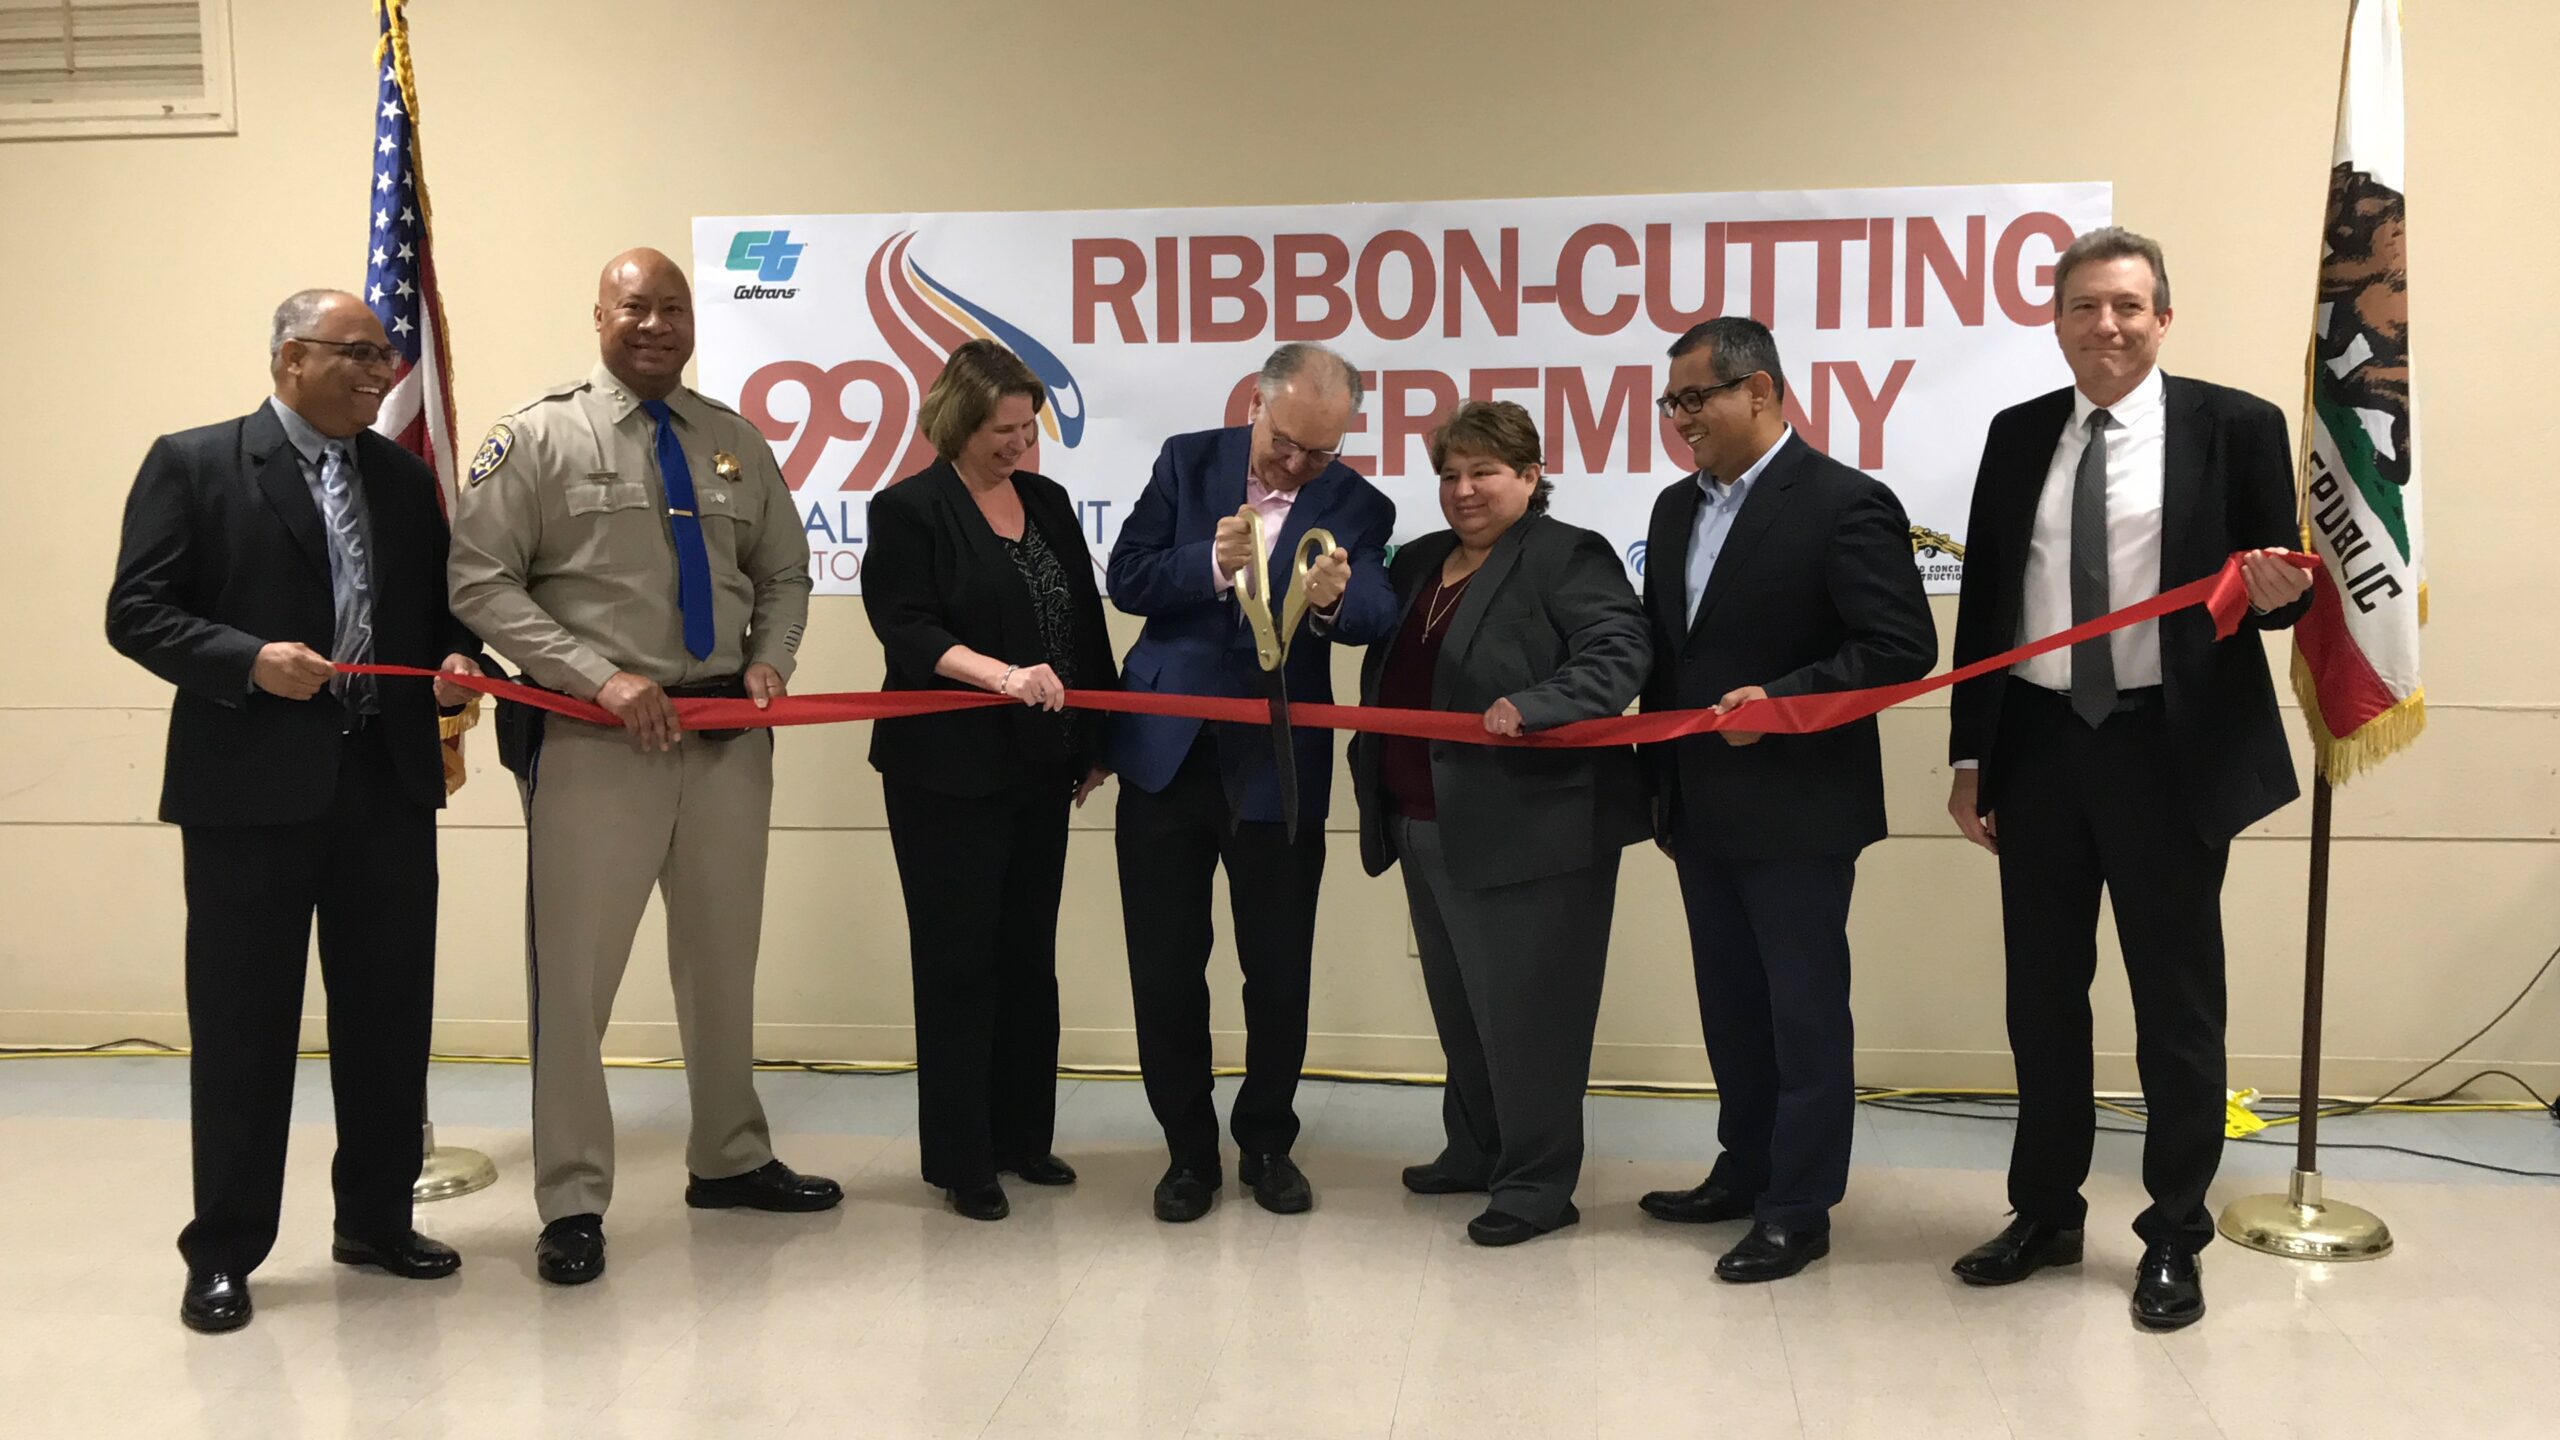 Ribbon-cutting ceremony for the completion of the 99 Realignment.